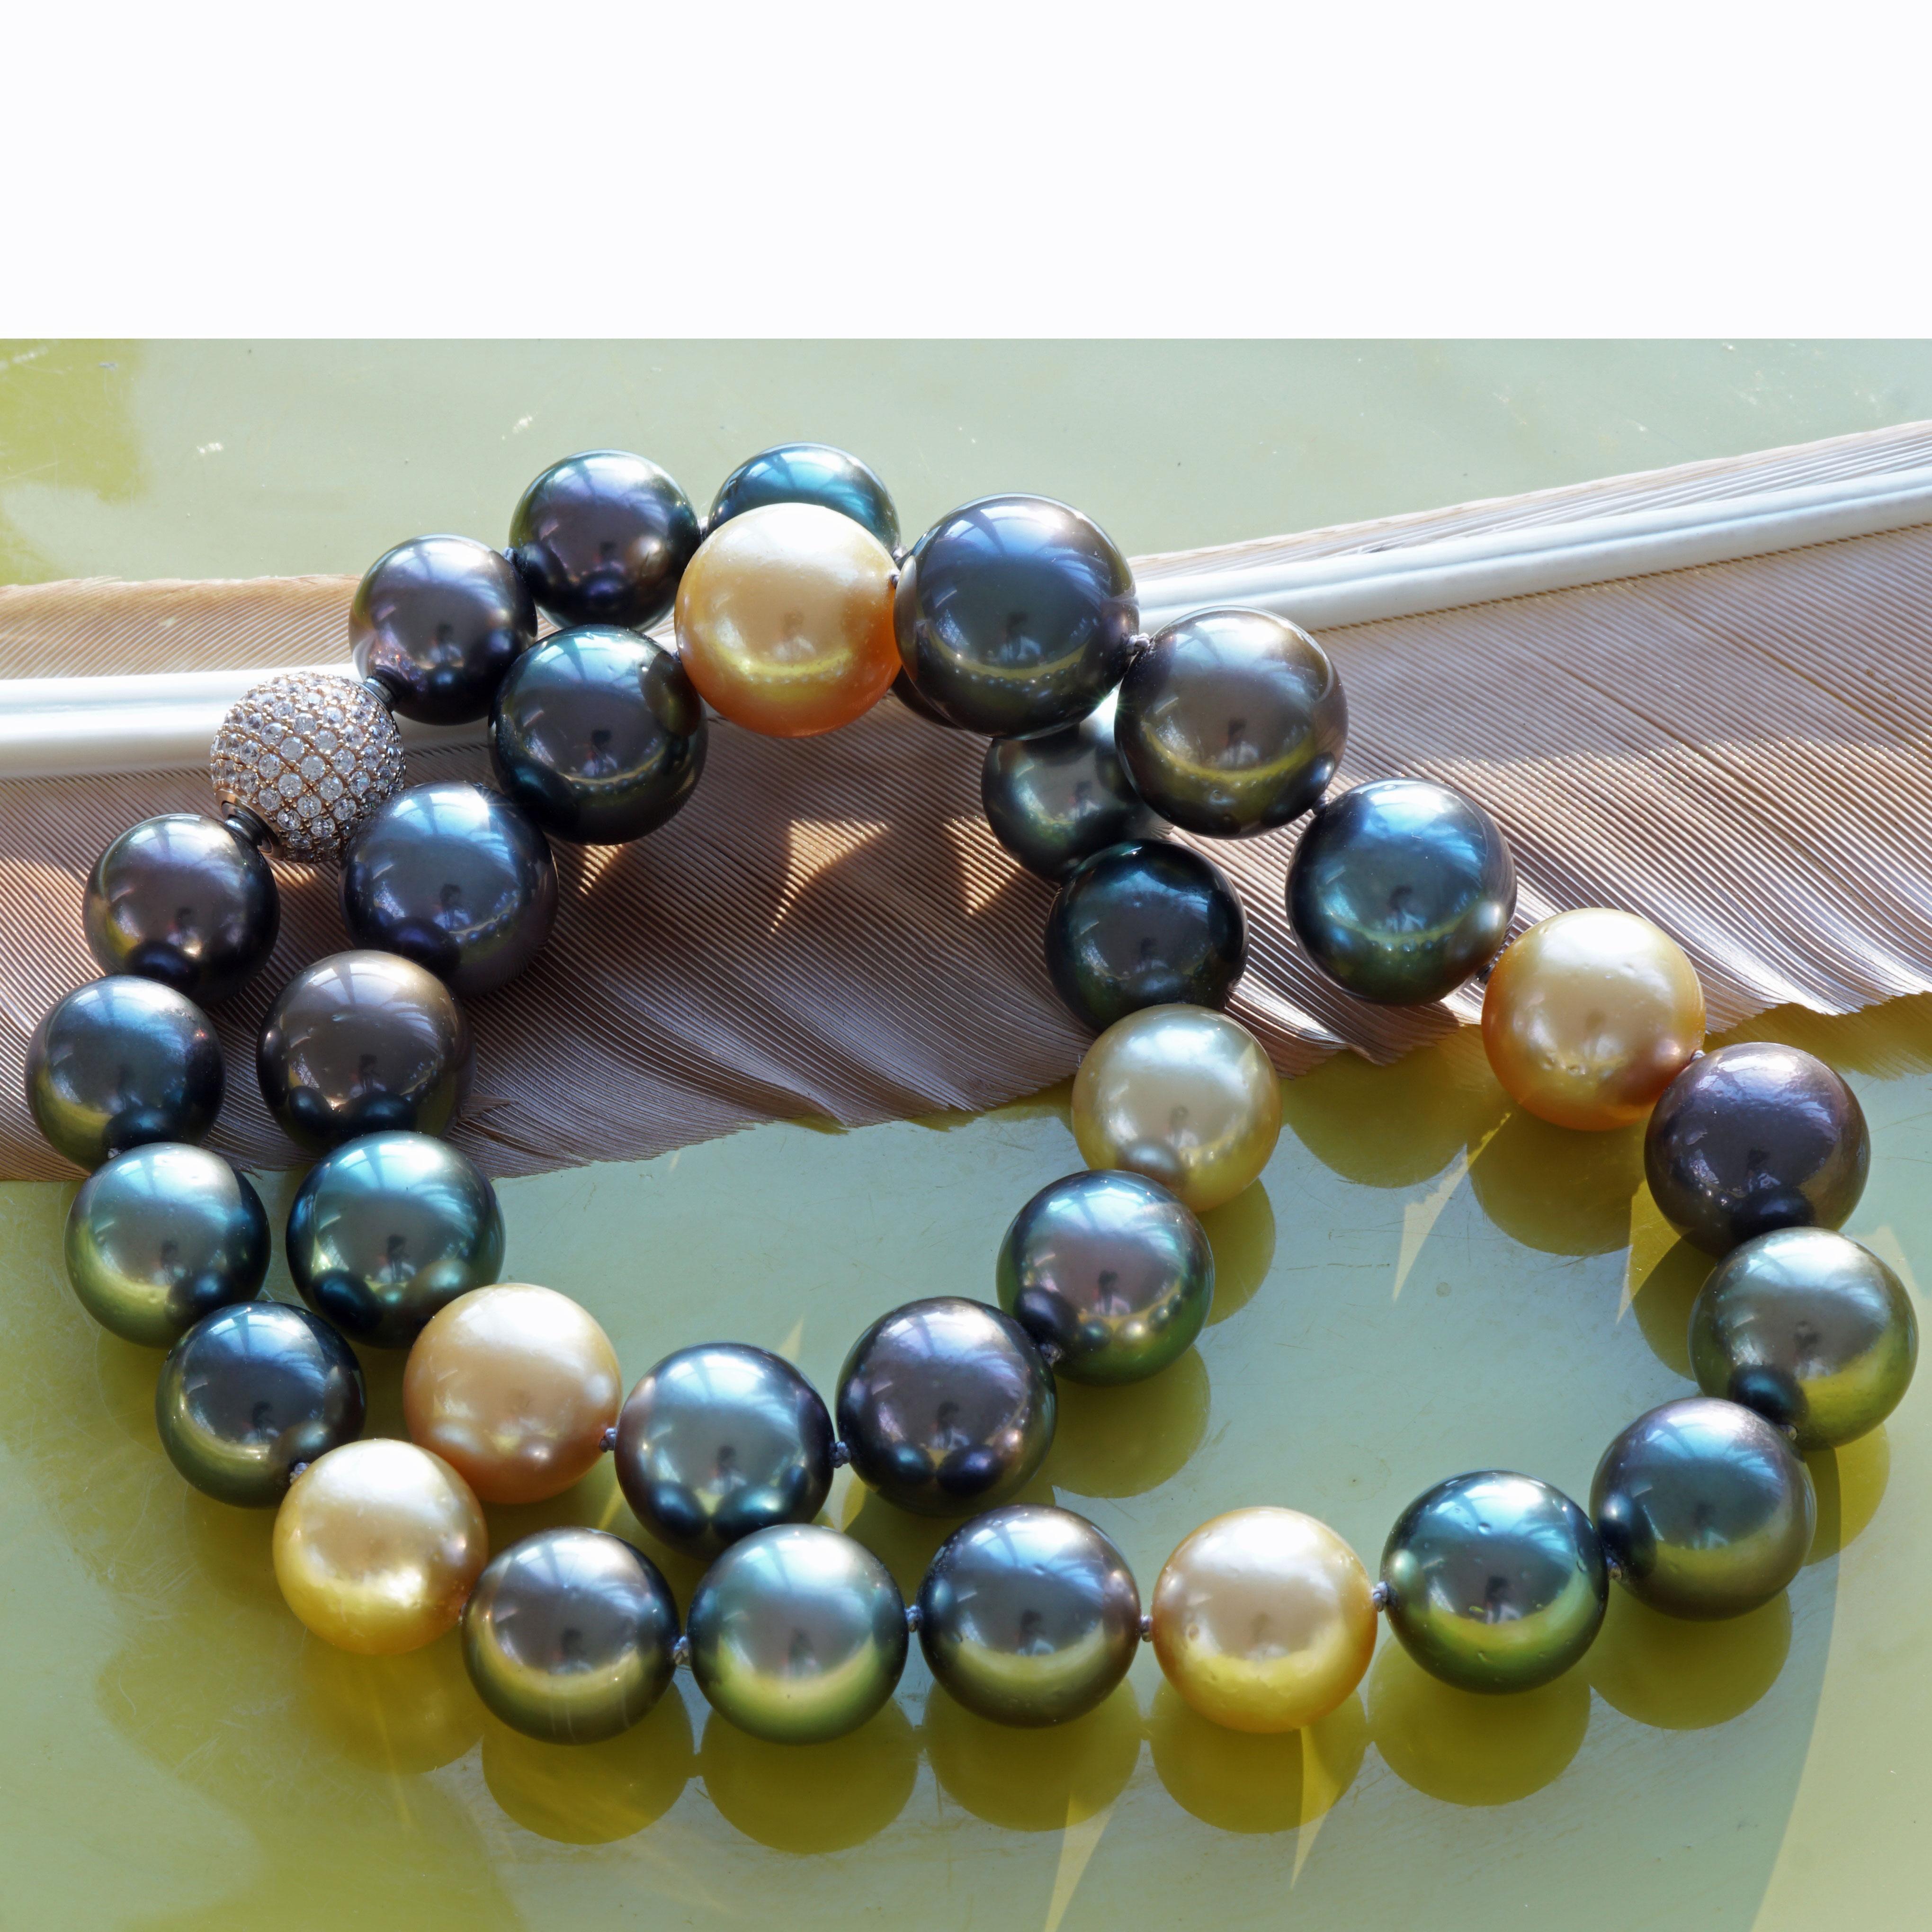 Bead AAA+ Tahiti Southsea Necklace Wow What Colors Gold Mocha Pistachio Grey 12-15 mm For Sale